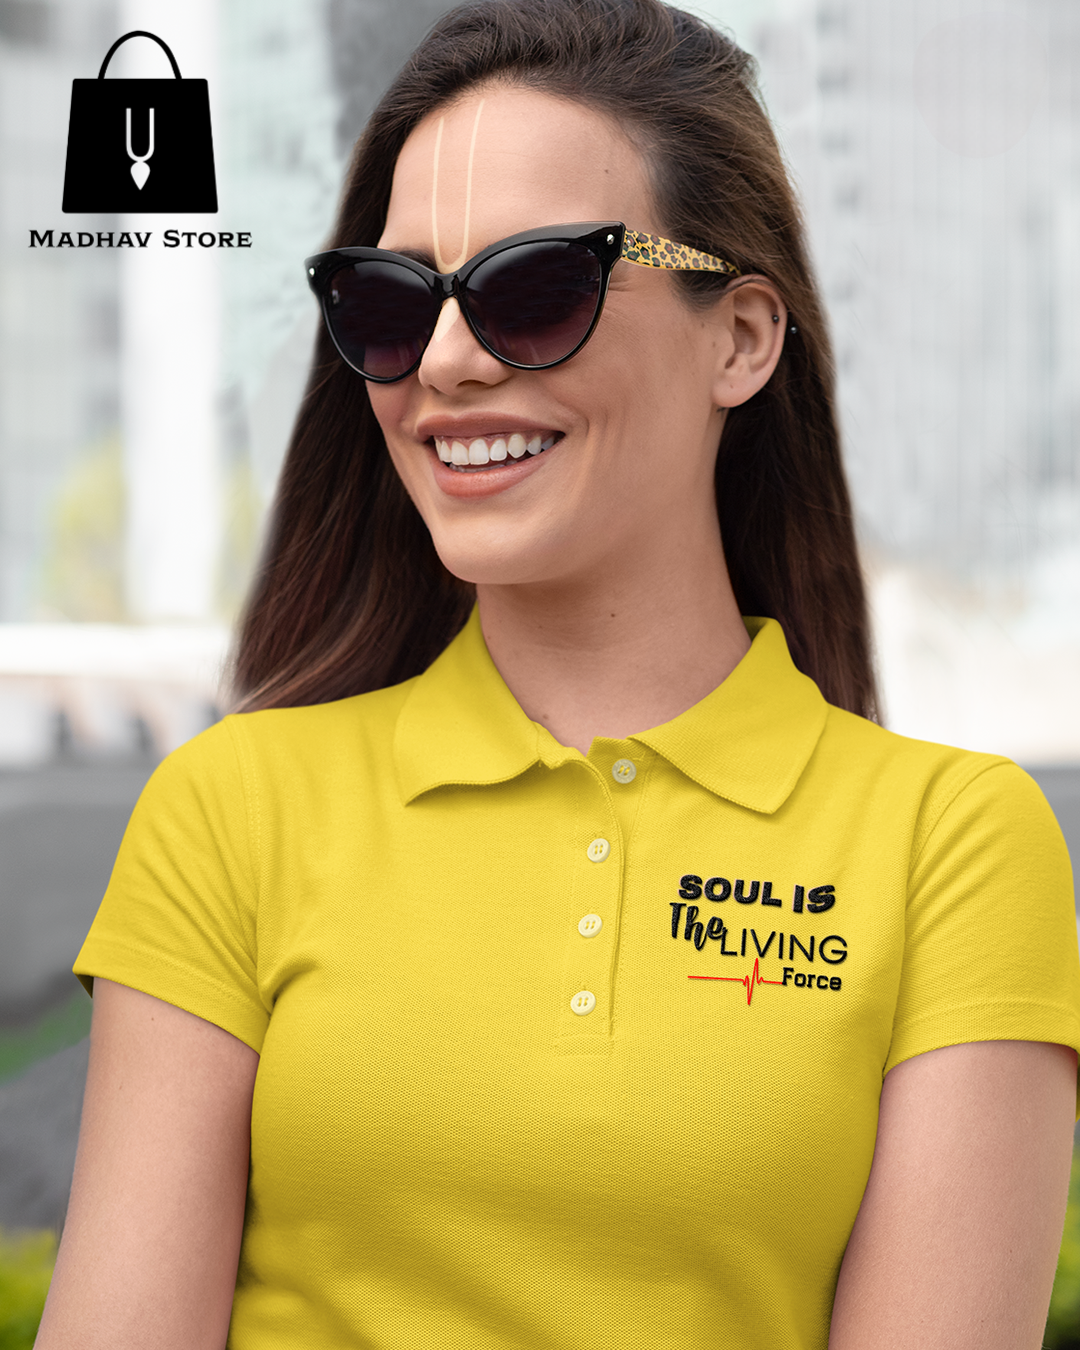 Soul is living force Classic Polo Tshirt for Women